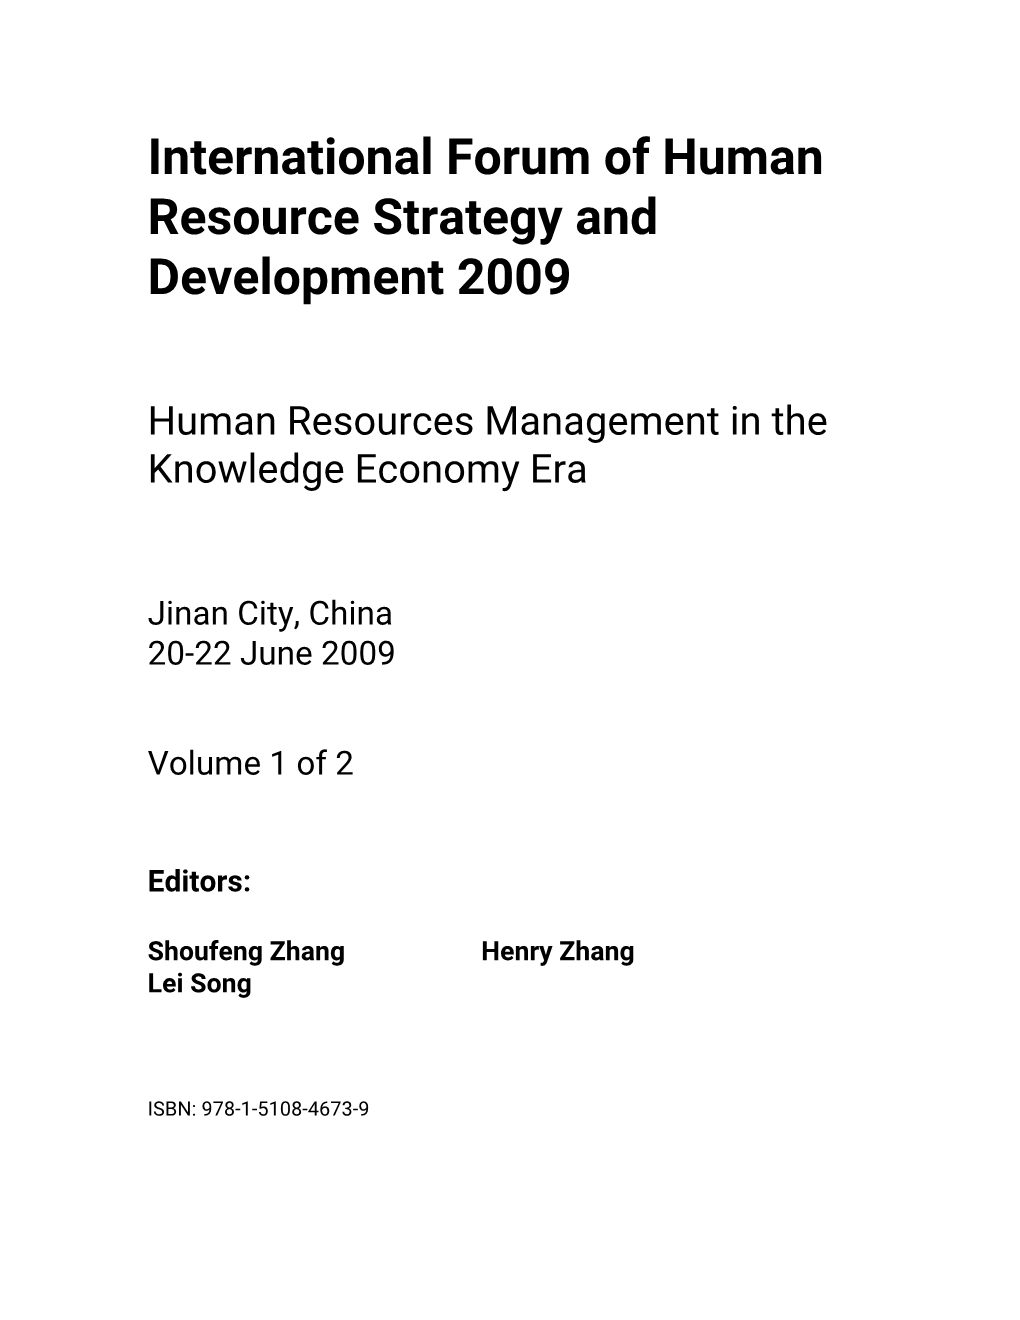 International Forum of Human Resource Strategy And